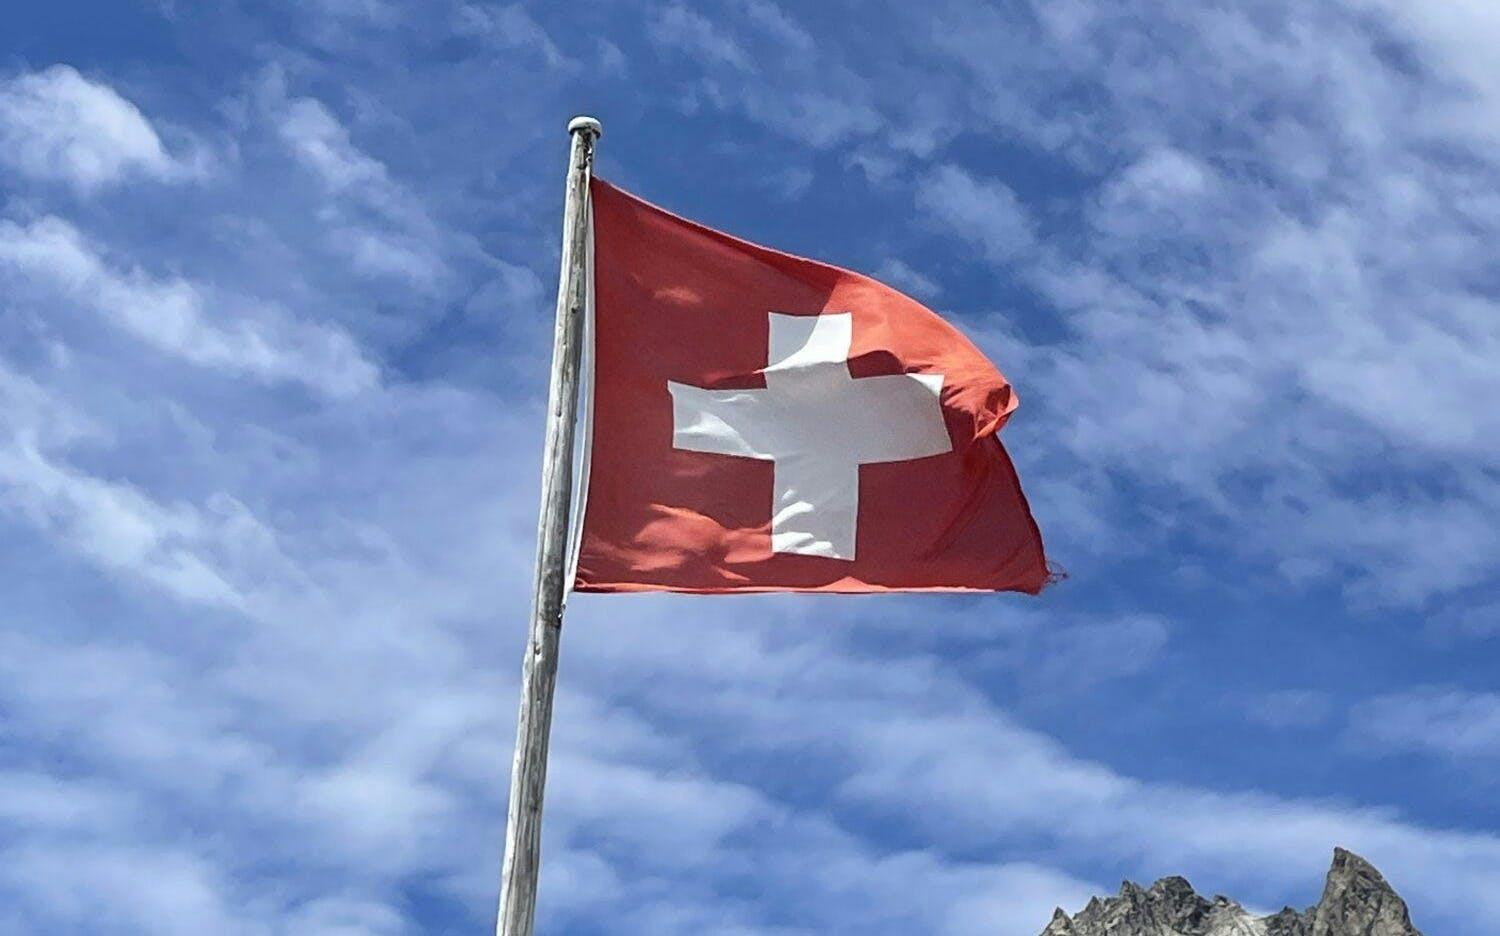 A flag of Switzerland blowing in the wind against a blue sky